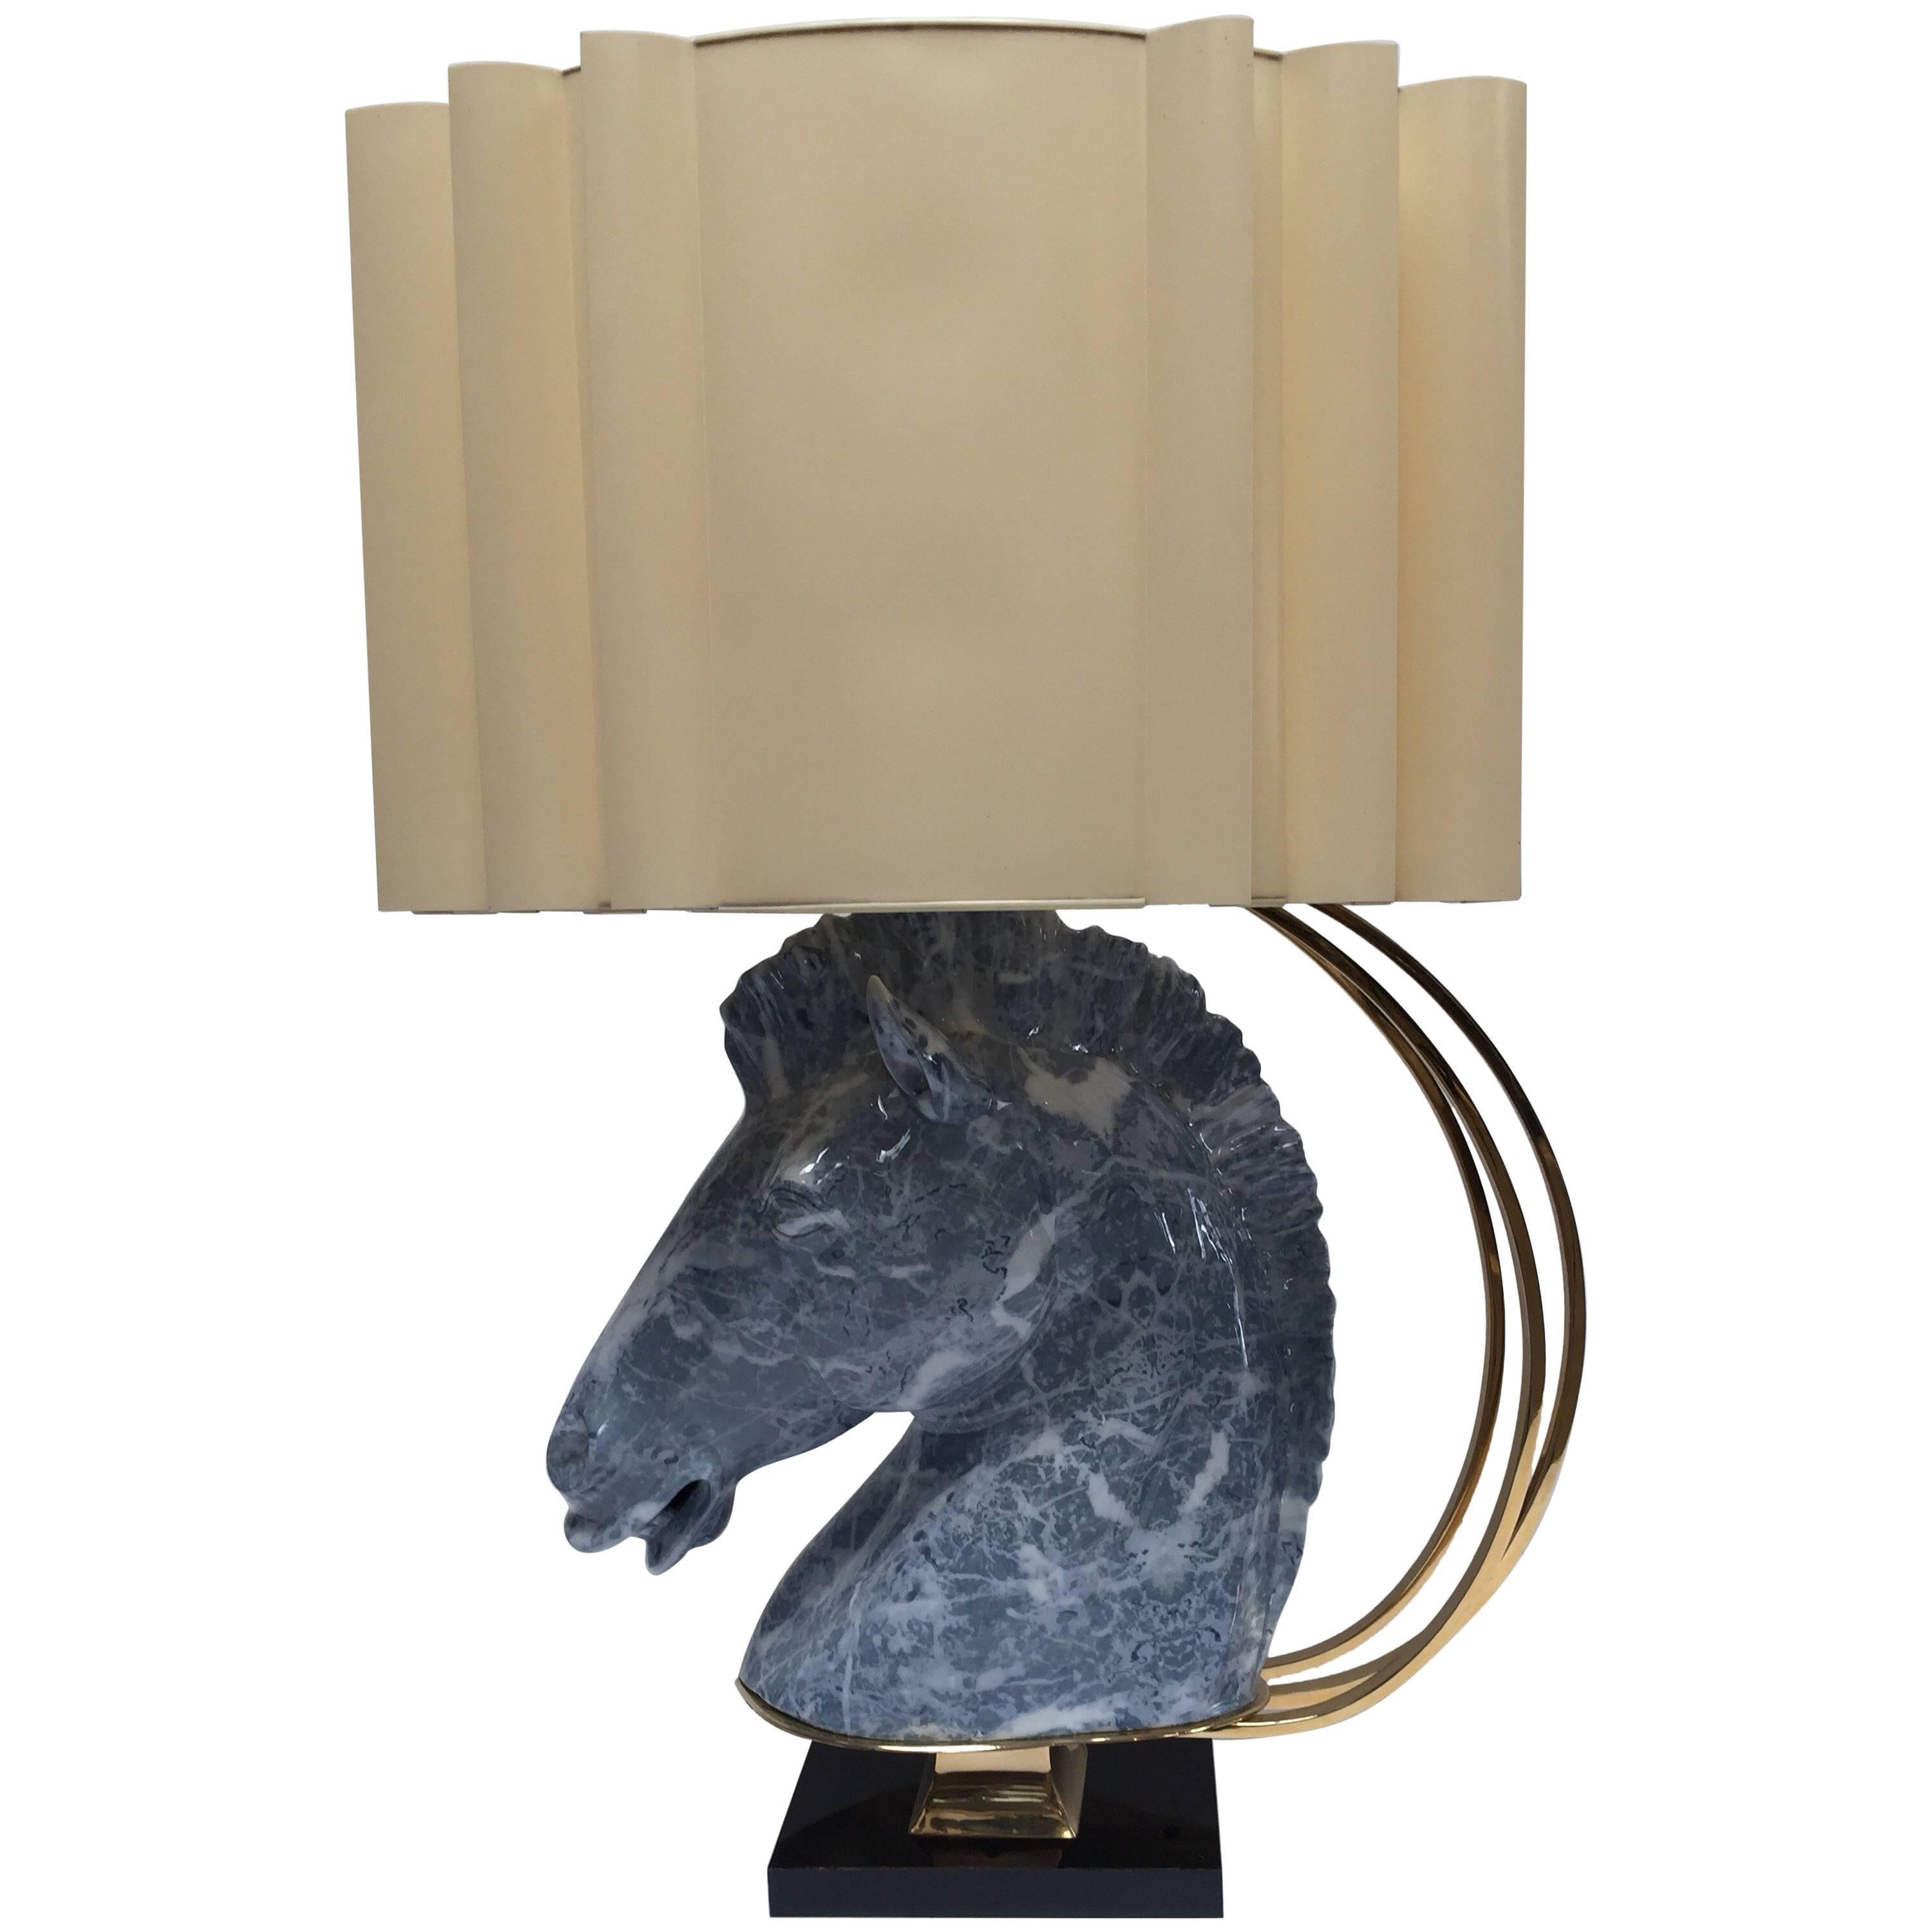 Large Sculptural Art Deco Ceramic Horse Bust Table Lamp with Brass Accent For Sale